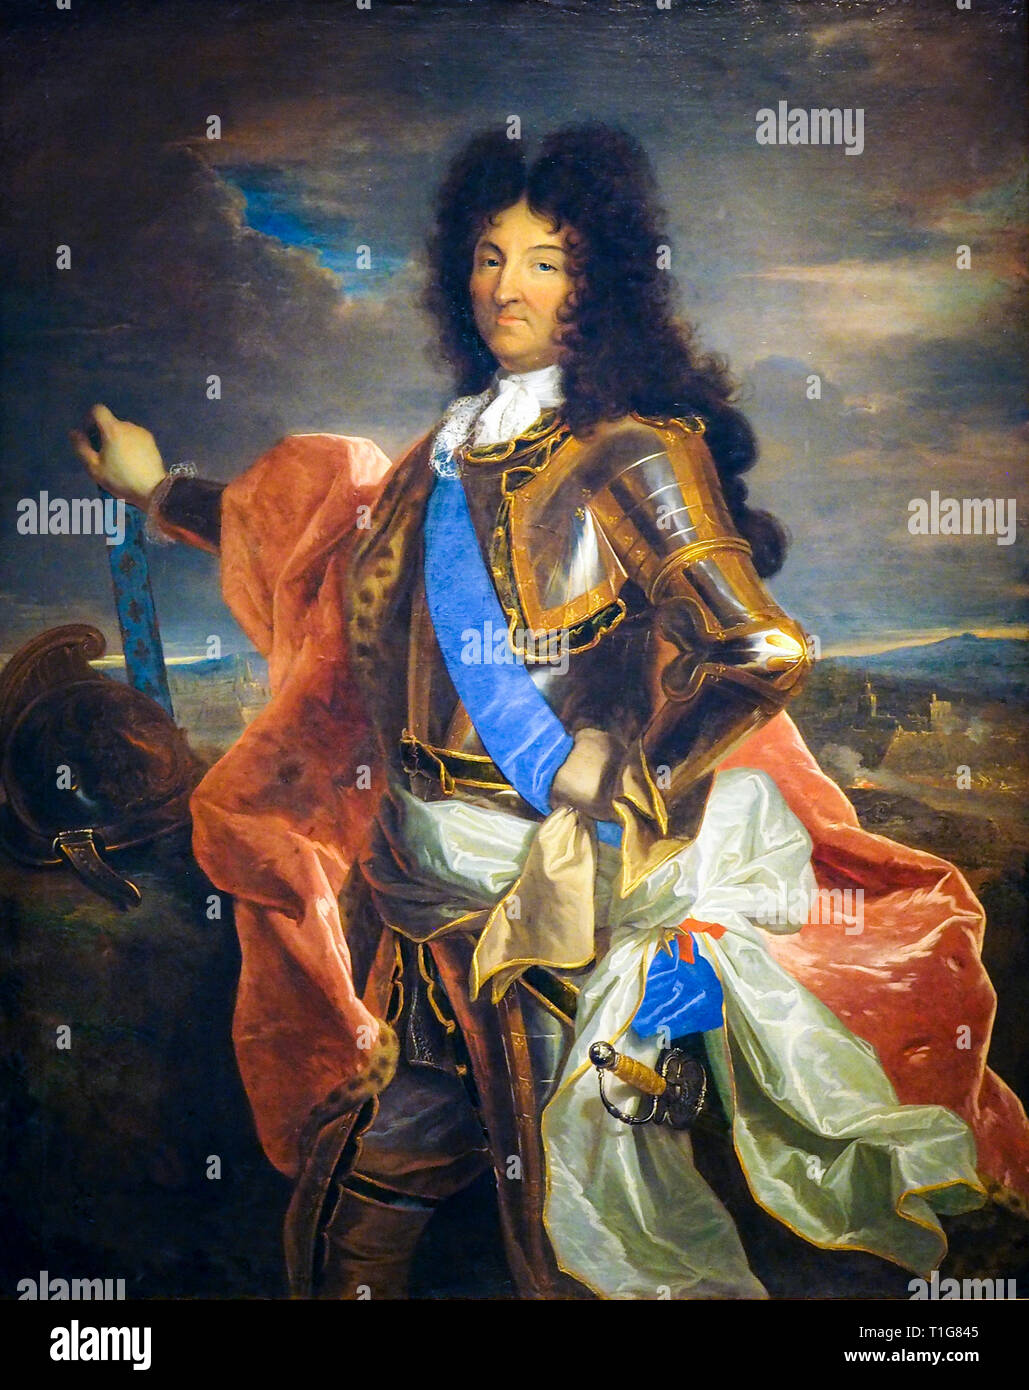 King Louis XIV of France (1638-1715), portrait painting in armour on horseback, Hyacinthe Rigaud, c. 1701 Stock Photo